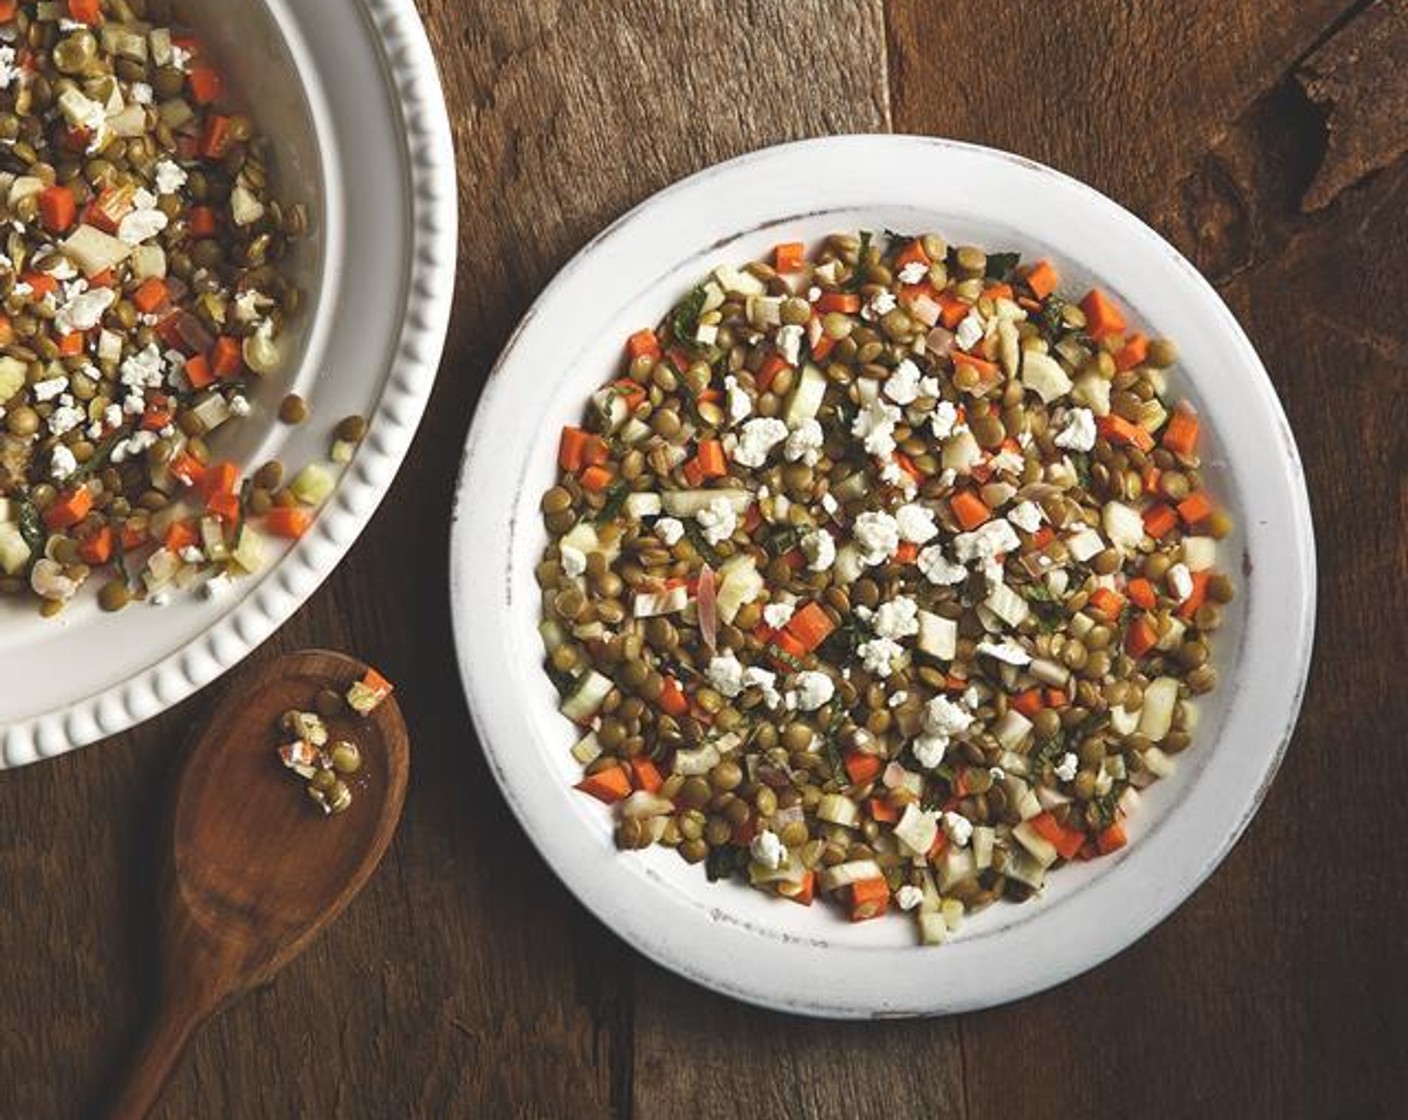 Lentil Salad with Goat Cheese and Mint